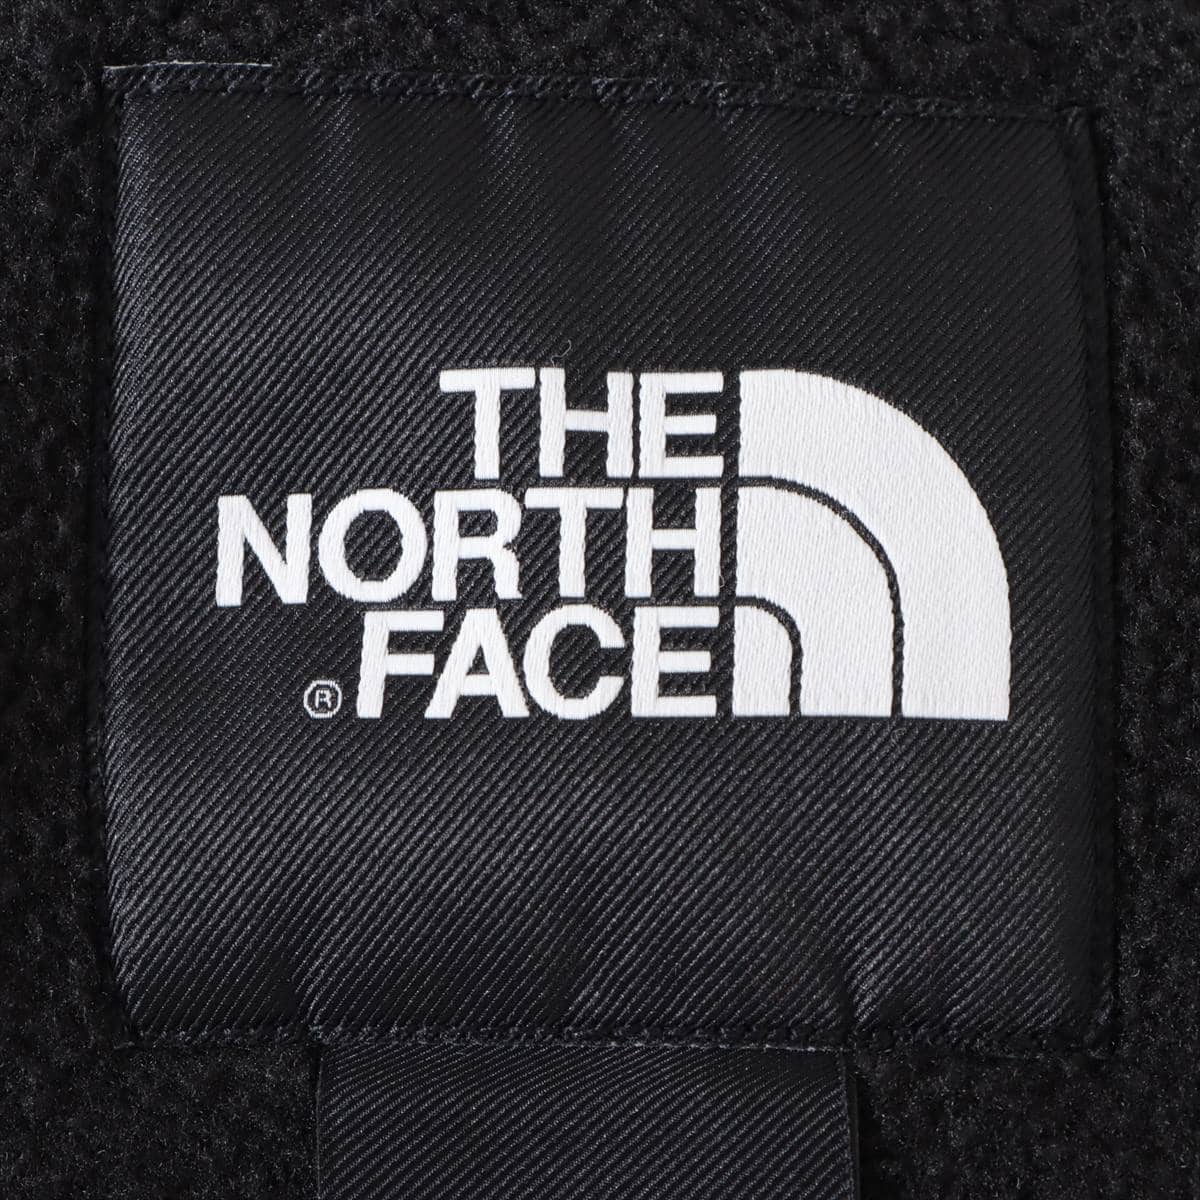 The North Face Polyester & nylon Overall XS Men's Black  Himalayan NF0A3MJJ